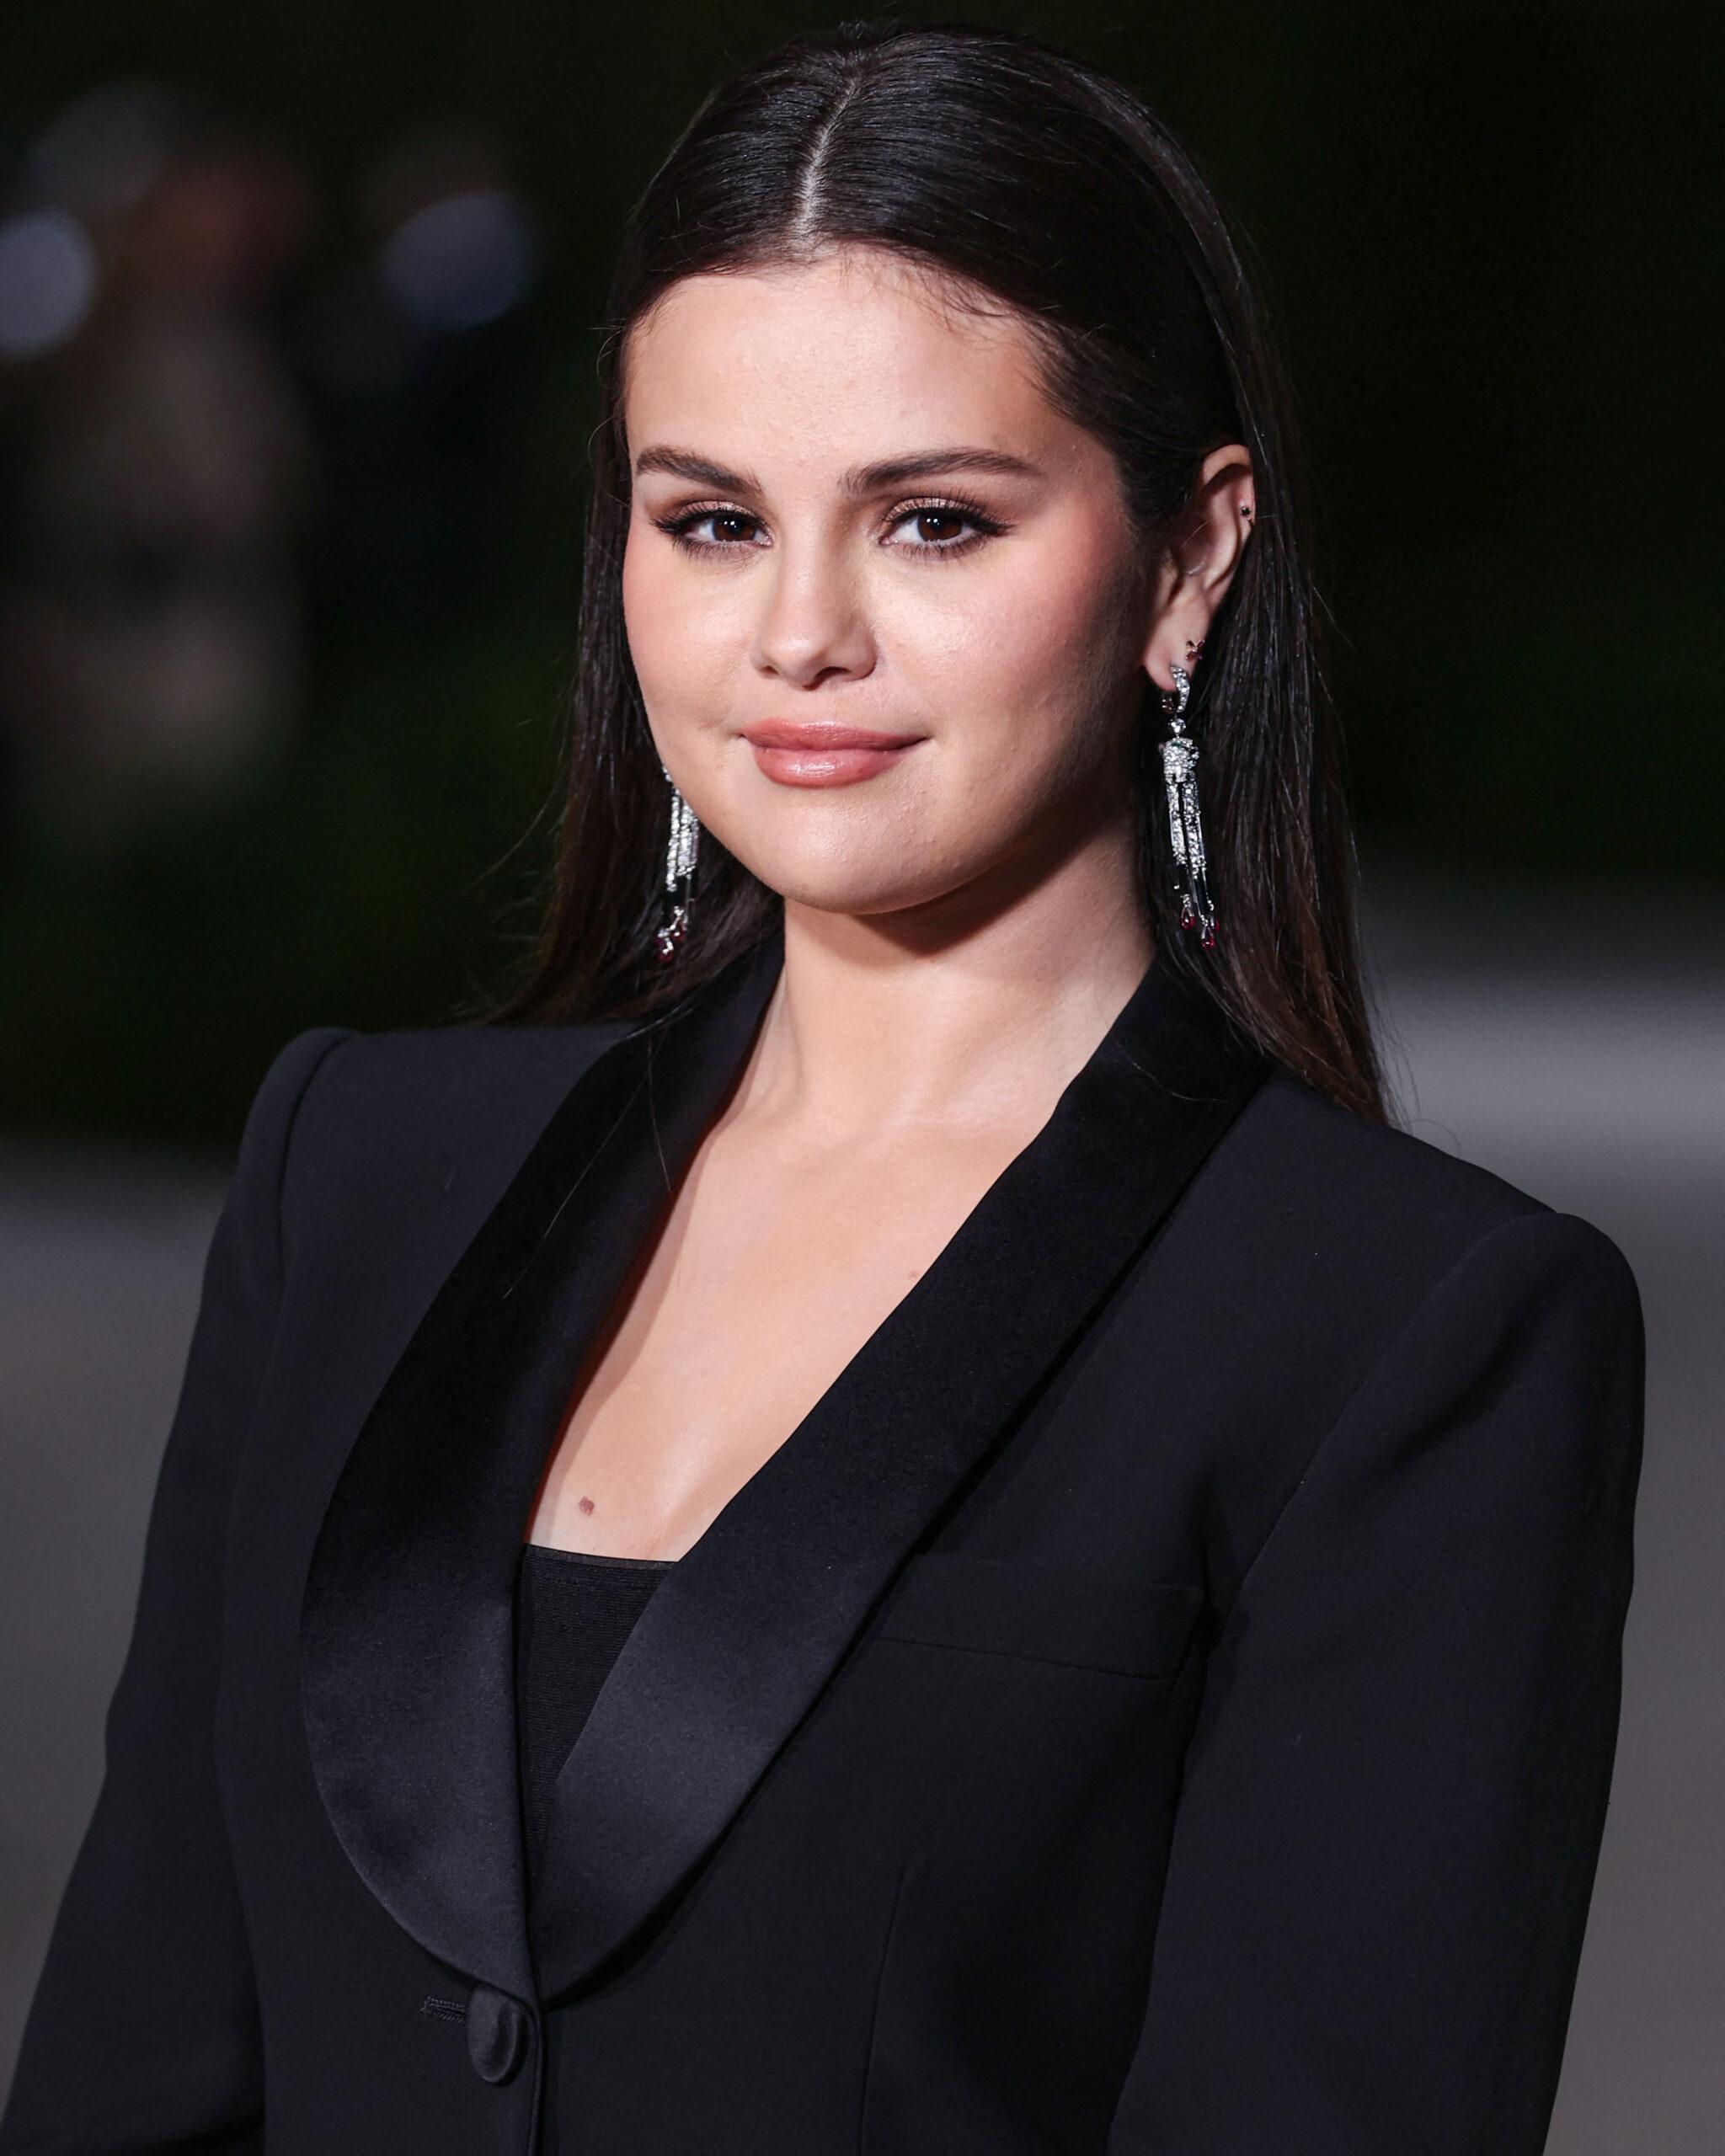 Selena Gomez at the 2nd Annual Academy Museum of Motion Pictures Gala